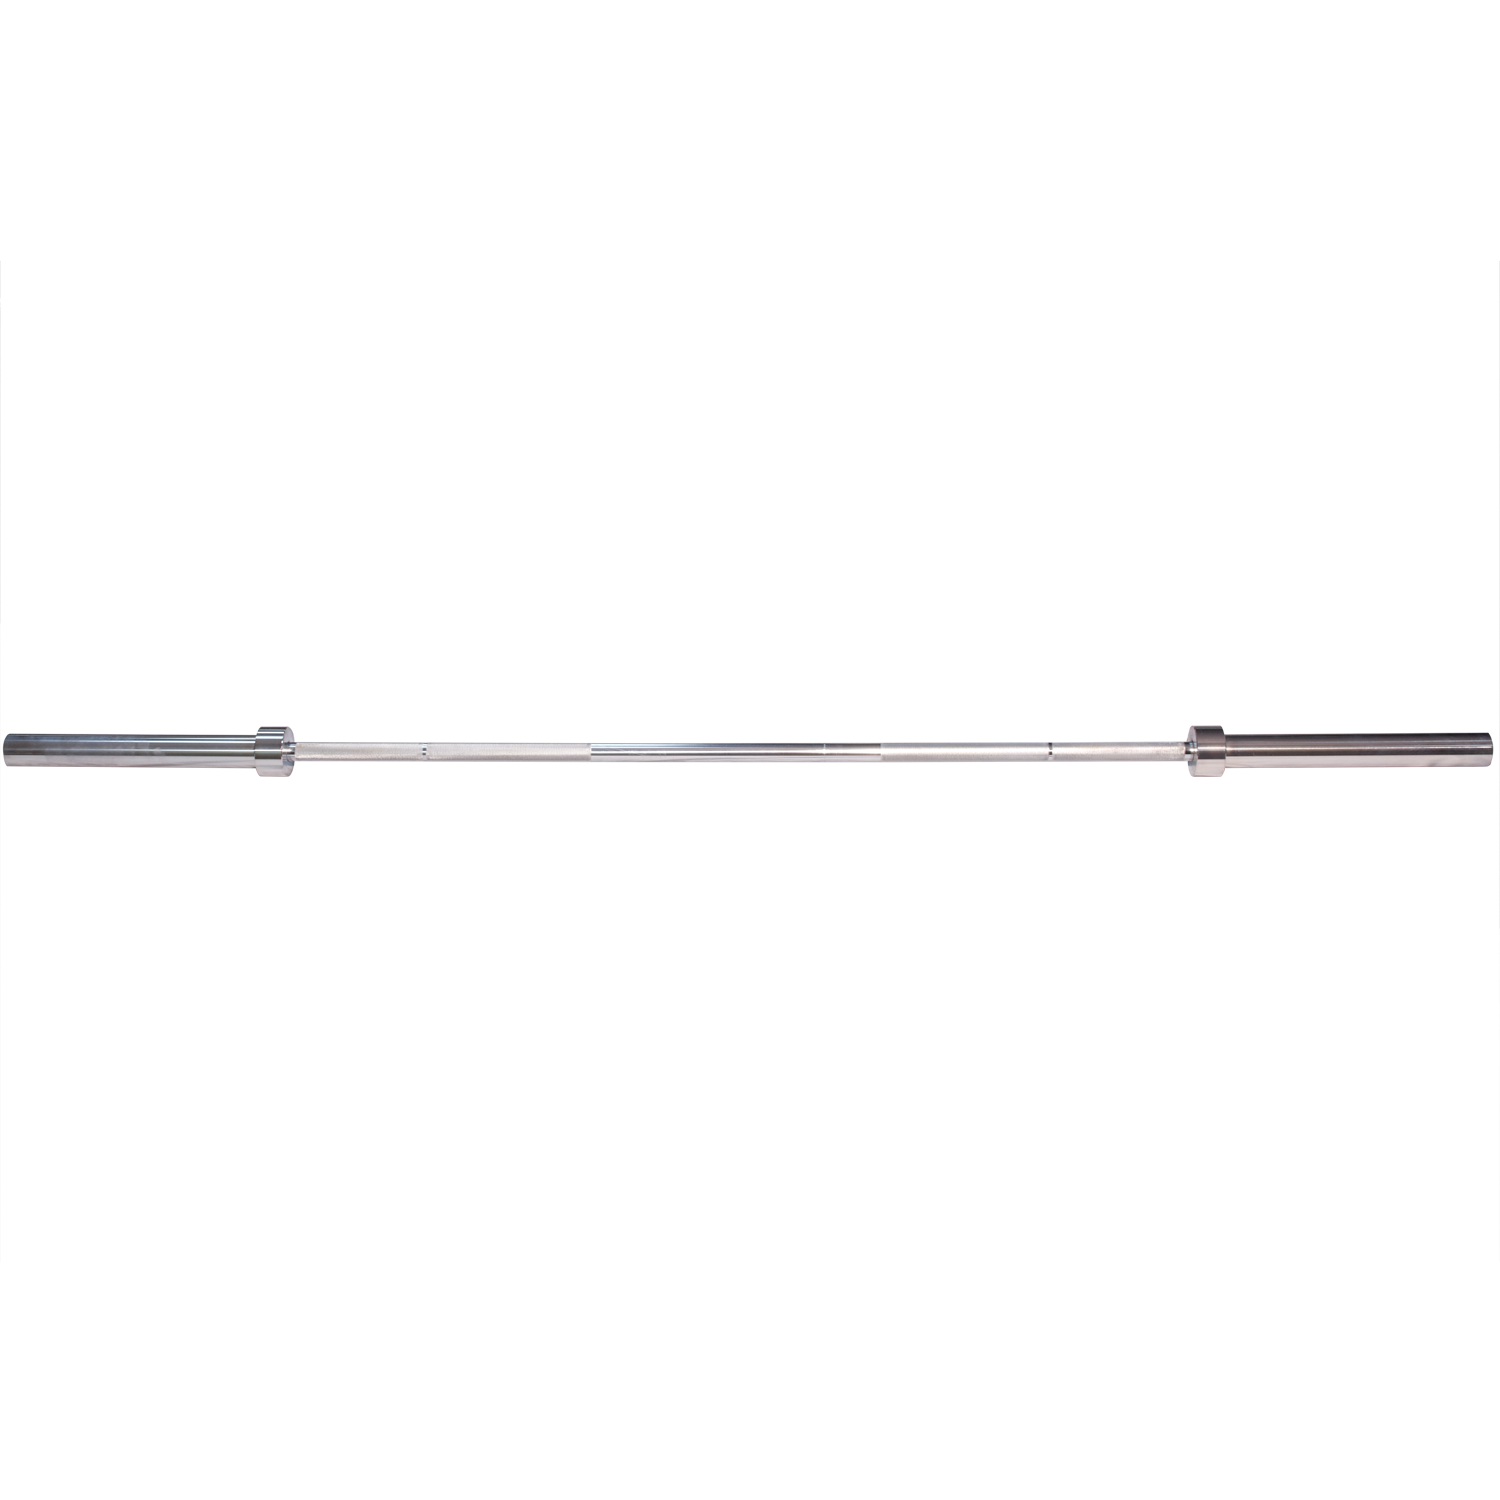 Barre  Olympic Power Bar Silver Bodysolid - FitnessBoutique